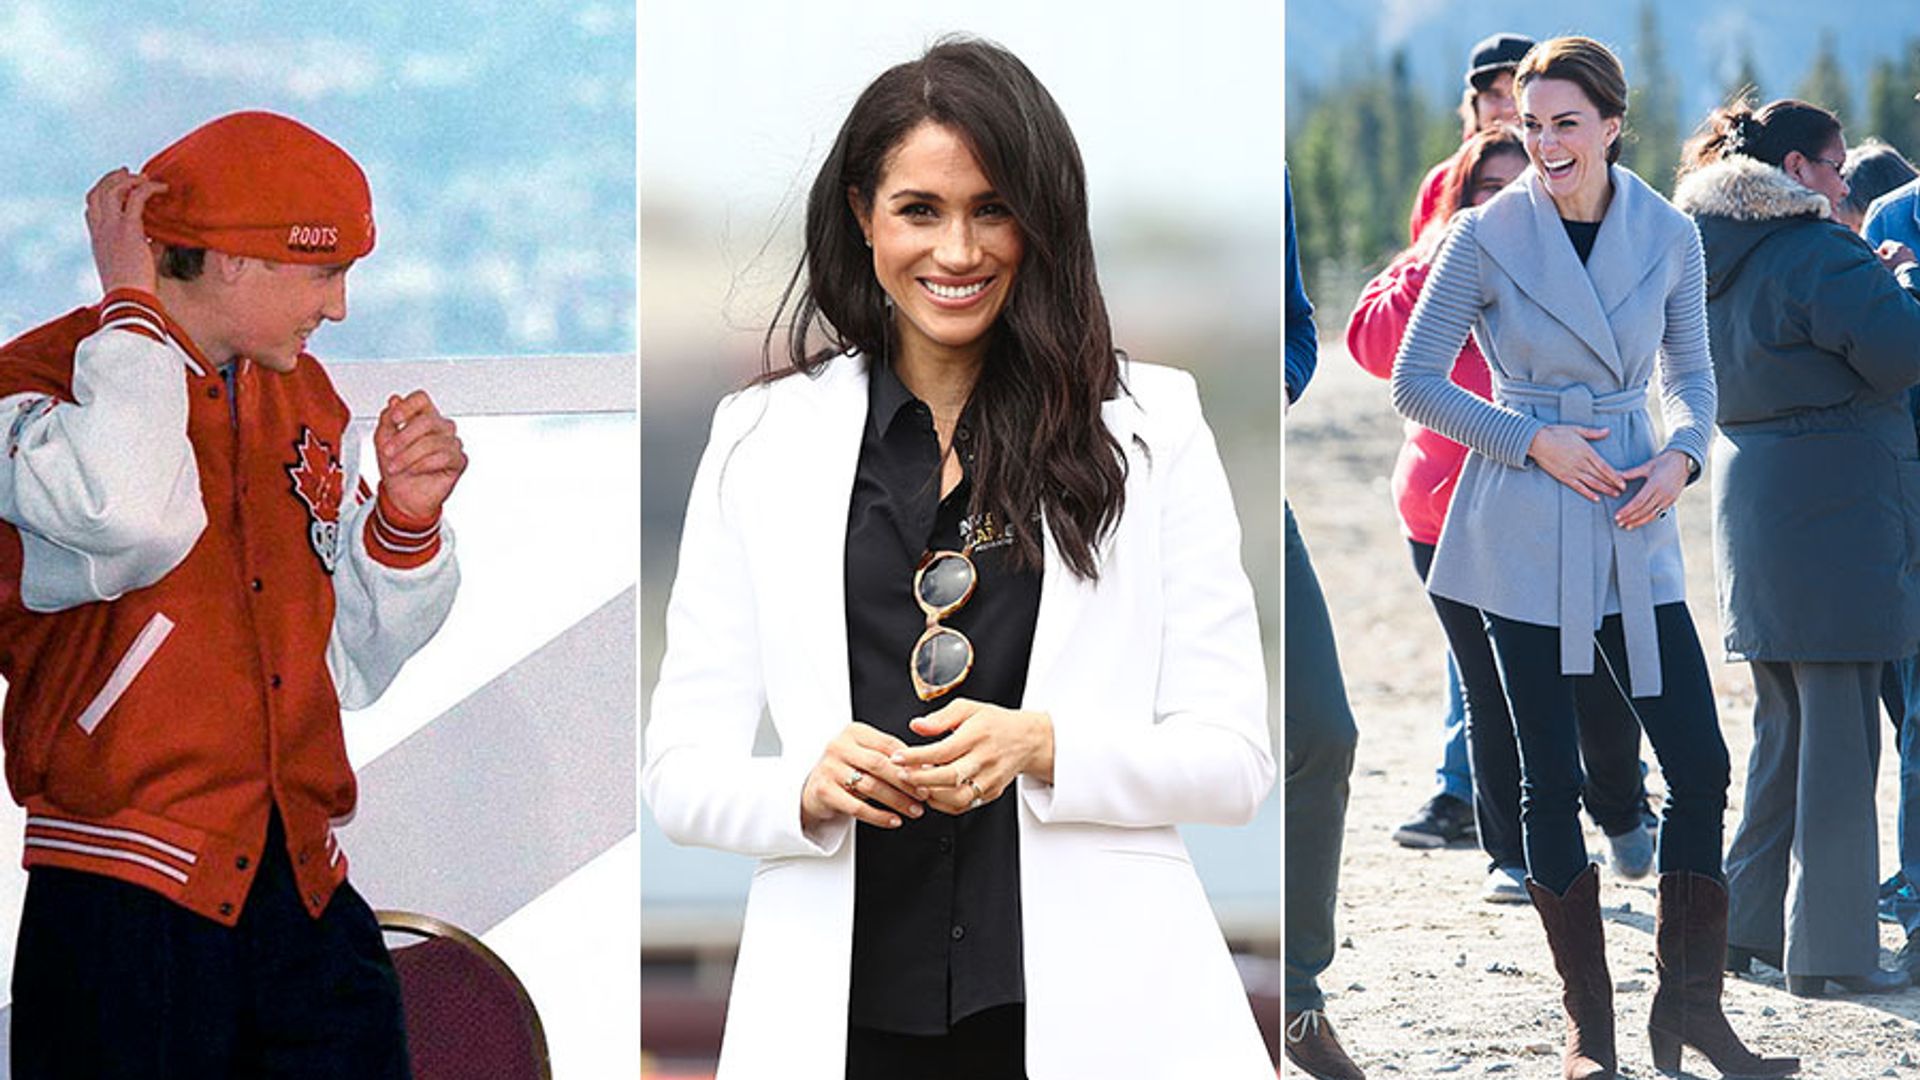 Canadian designers share how the Royal Family has elevated their brands